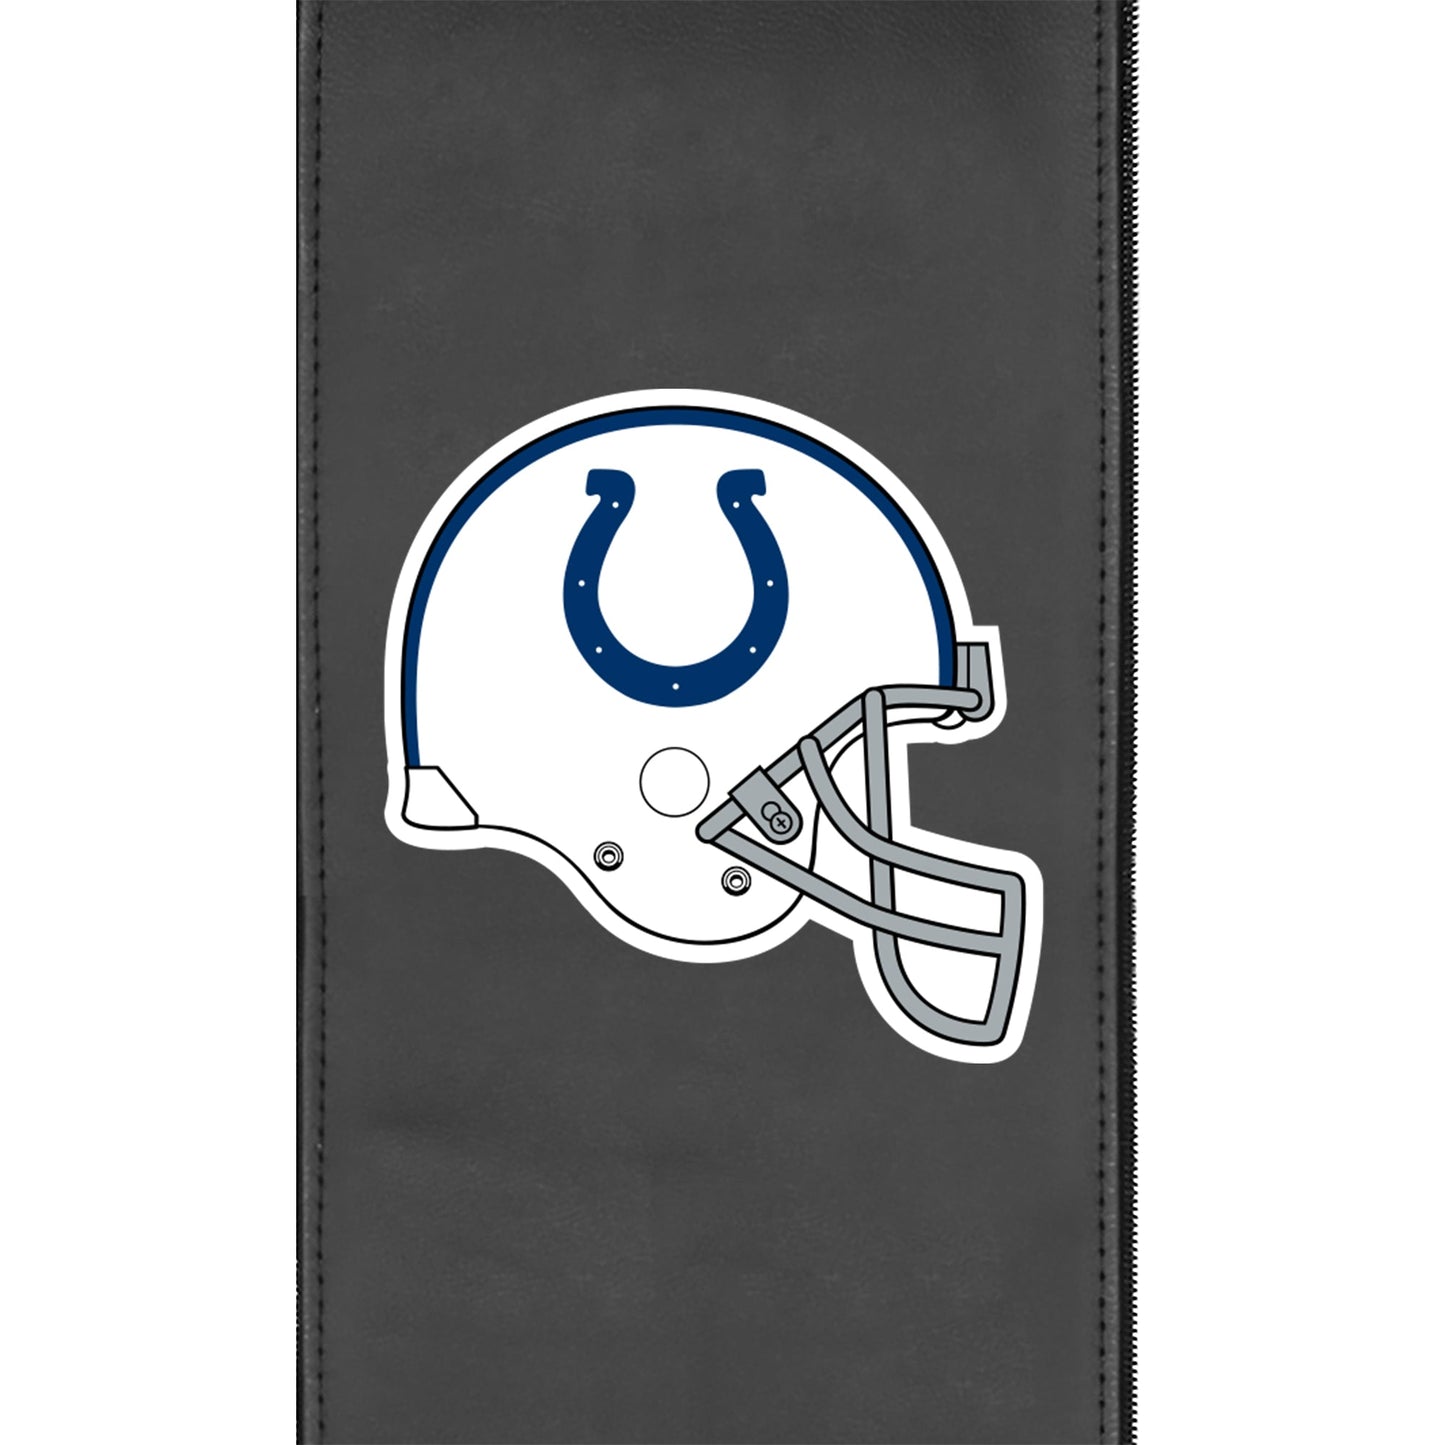 Office Chair 1000 with  Indianapolis Colts Helmet Logo